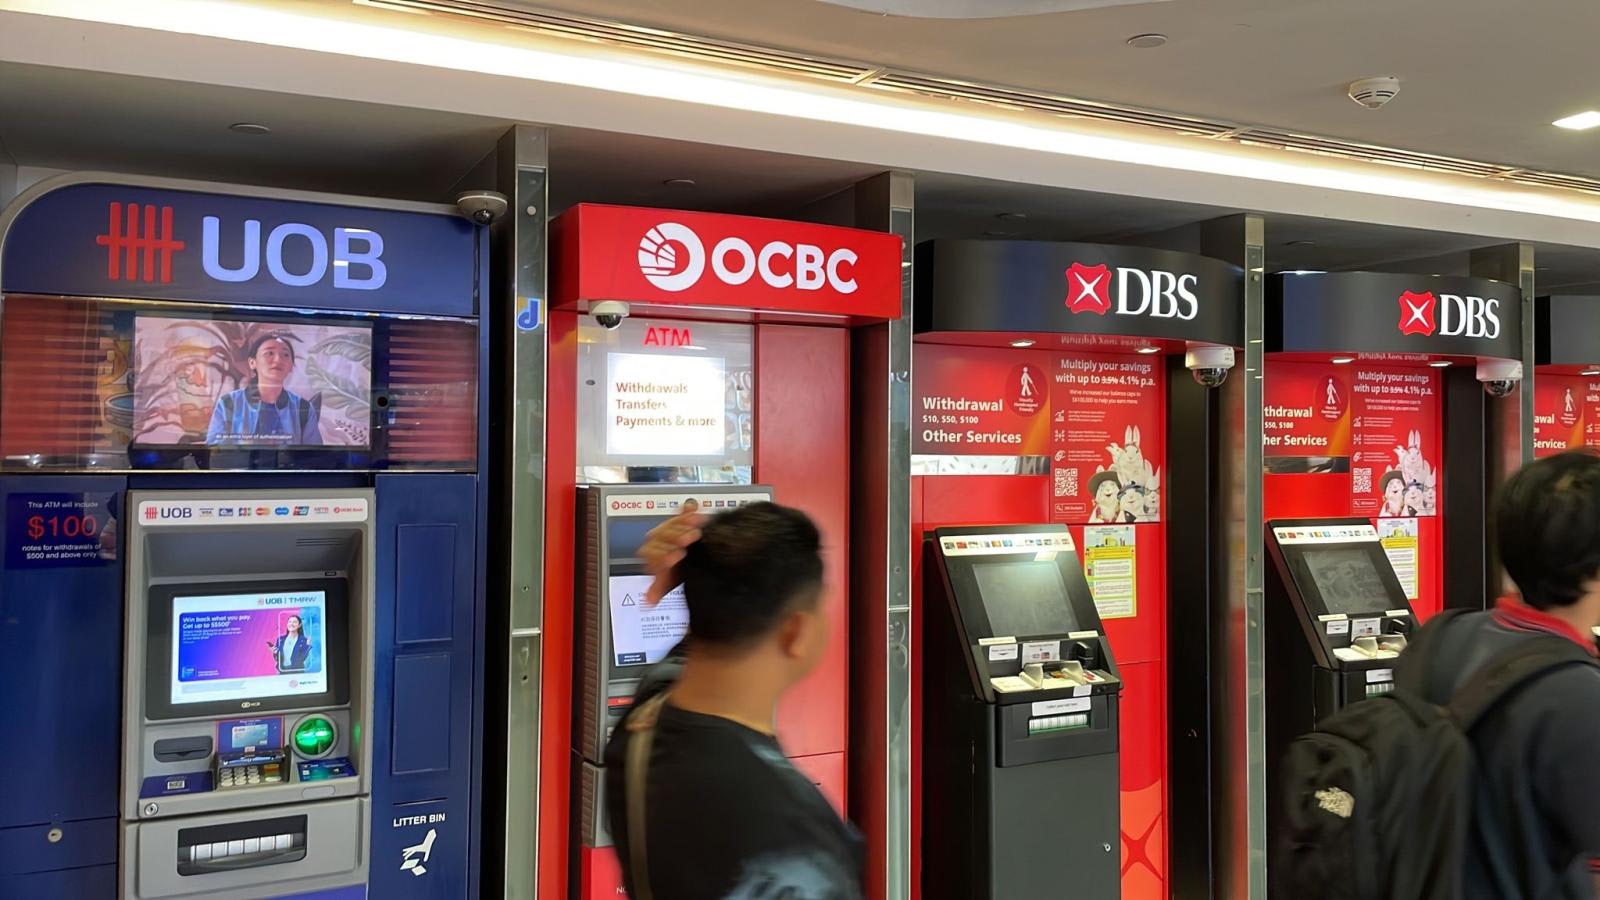 Commentary: Low interest rates of ‘money lock’ are a disservice to bank customers